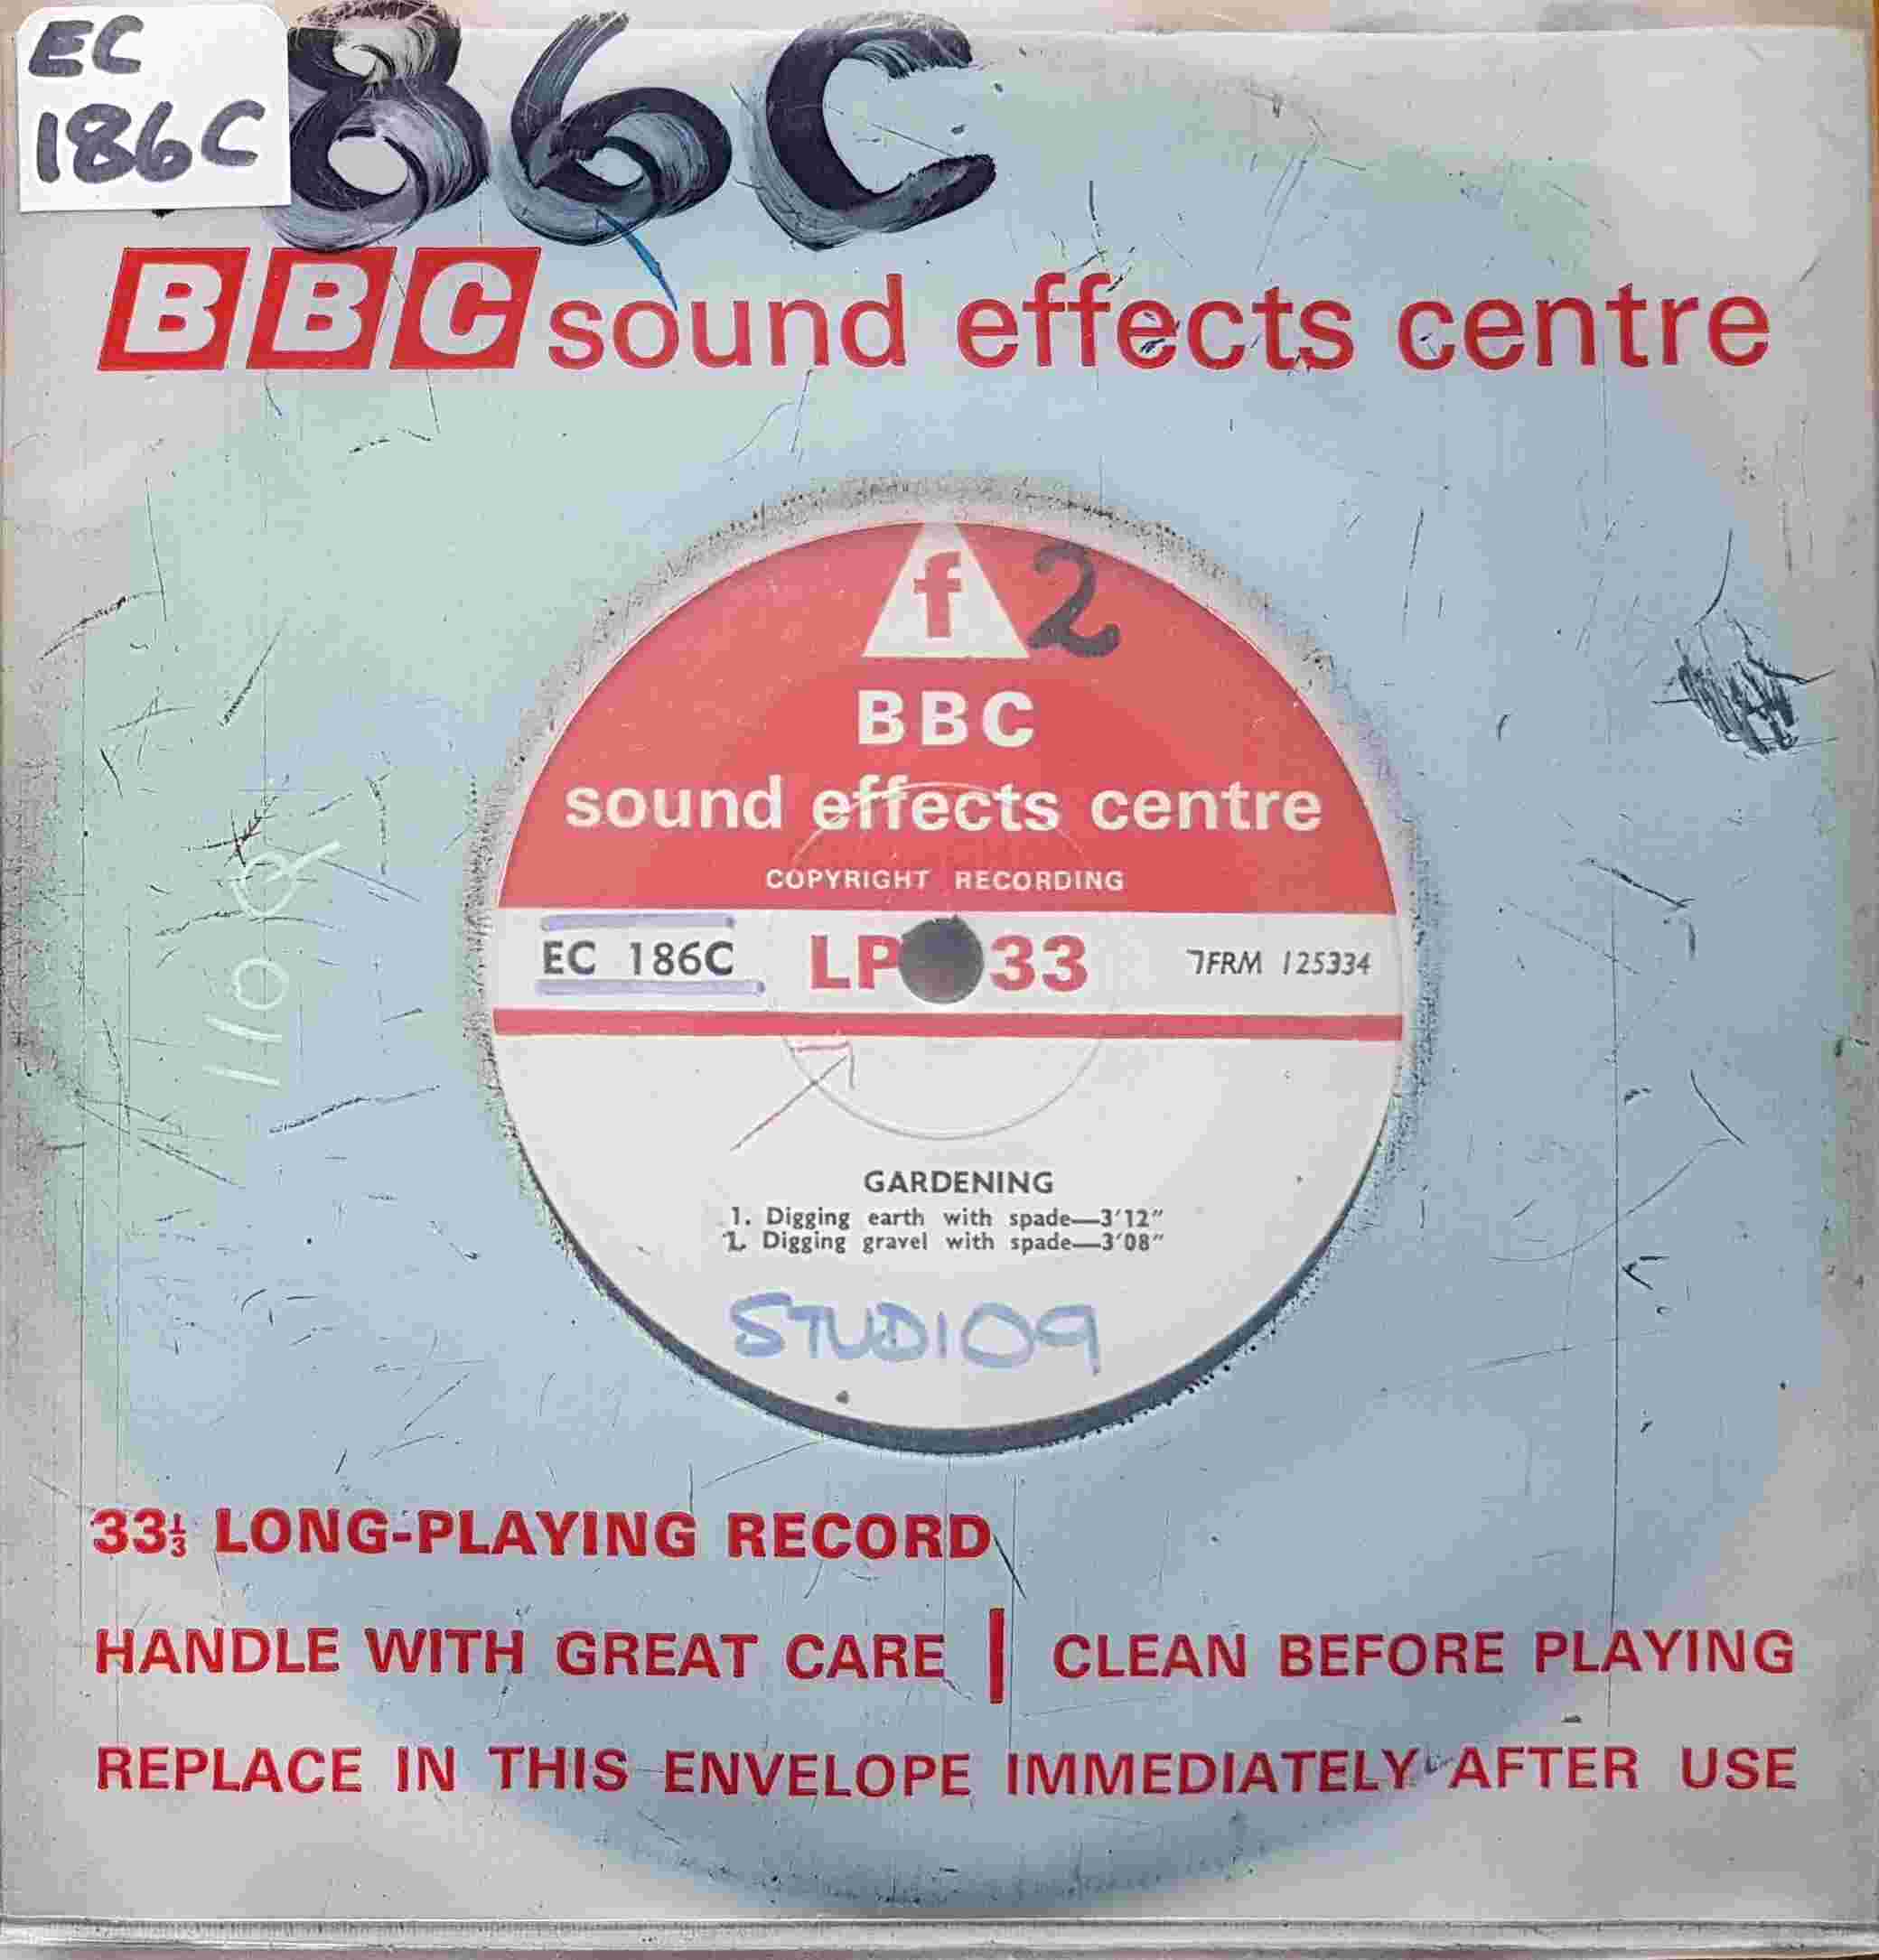 Picture of EC 186C Gardening by artist Not registered from the BBC singles - Records and Tapes library